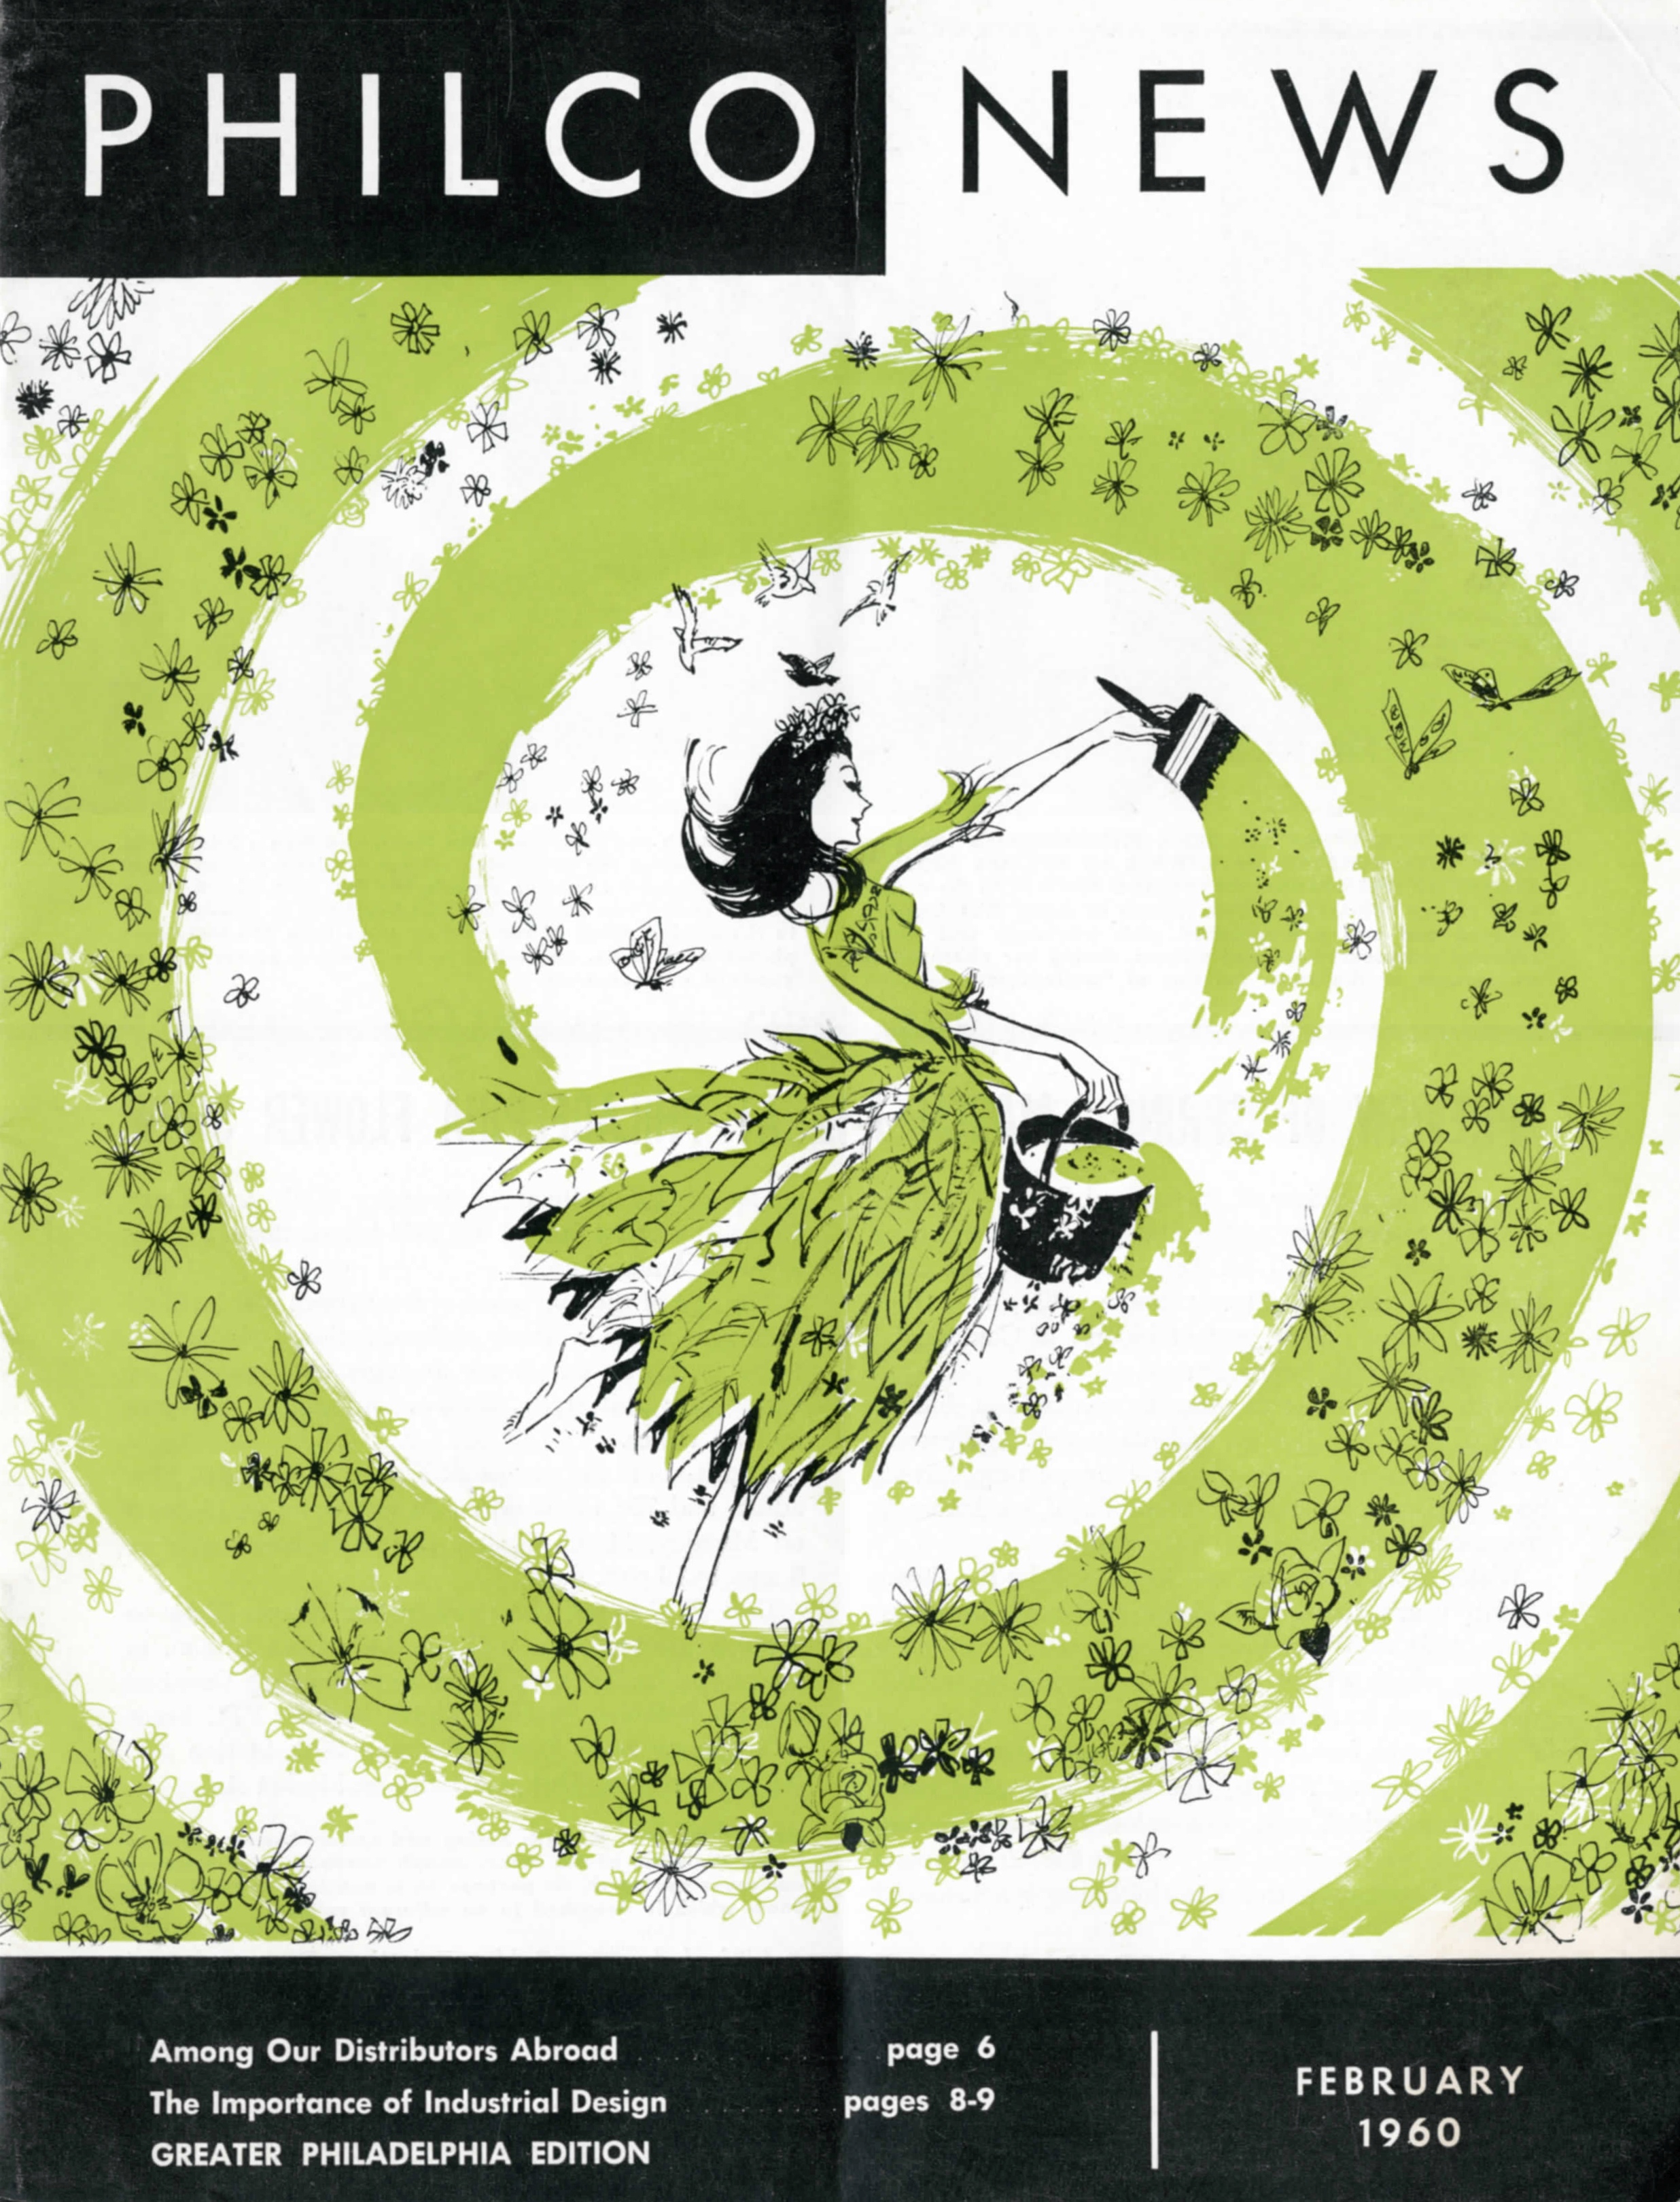 Magazine cover featuring a fairy-like figure with a paintbrush spreading a swirl of green flowers.